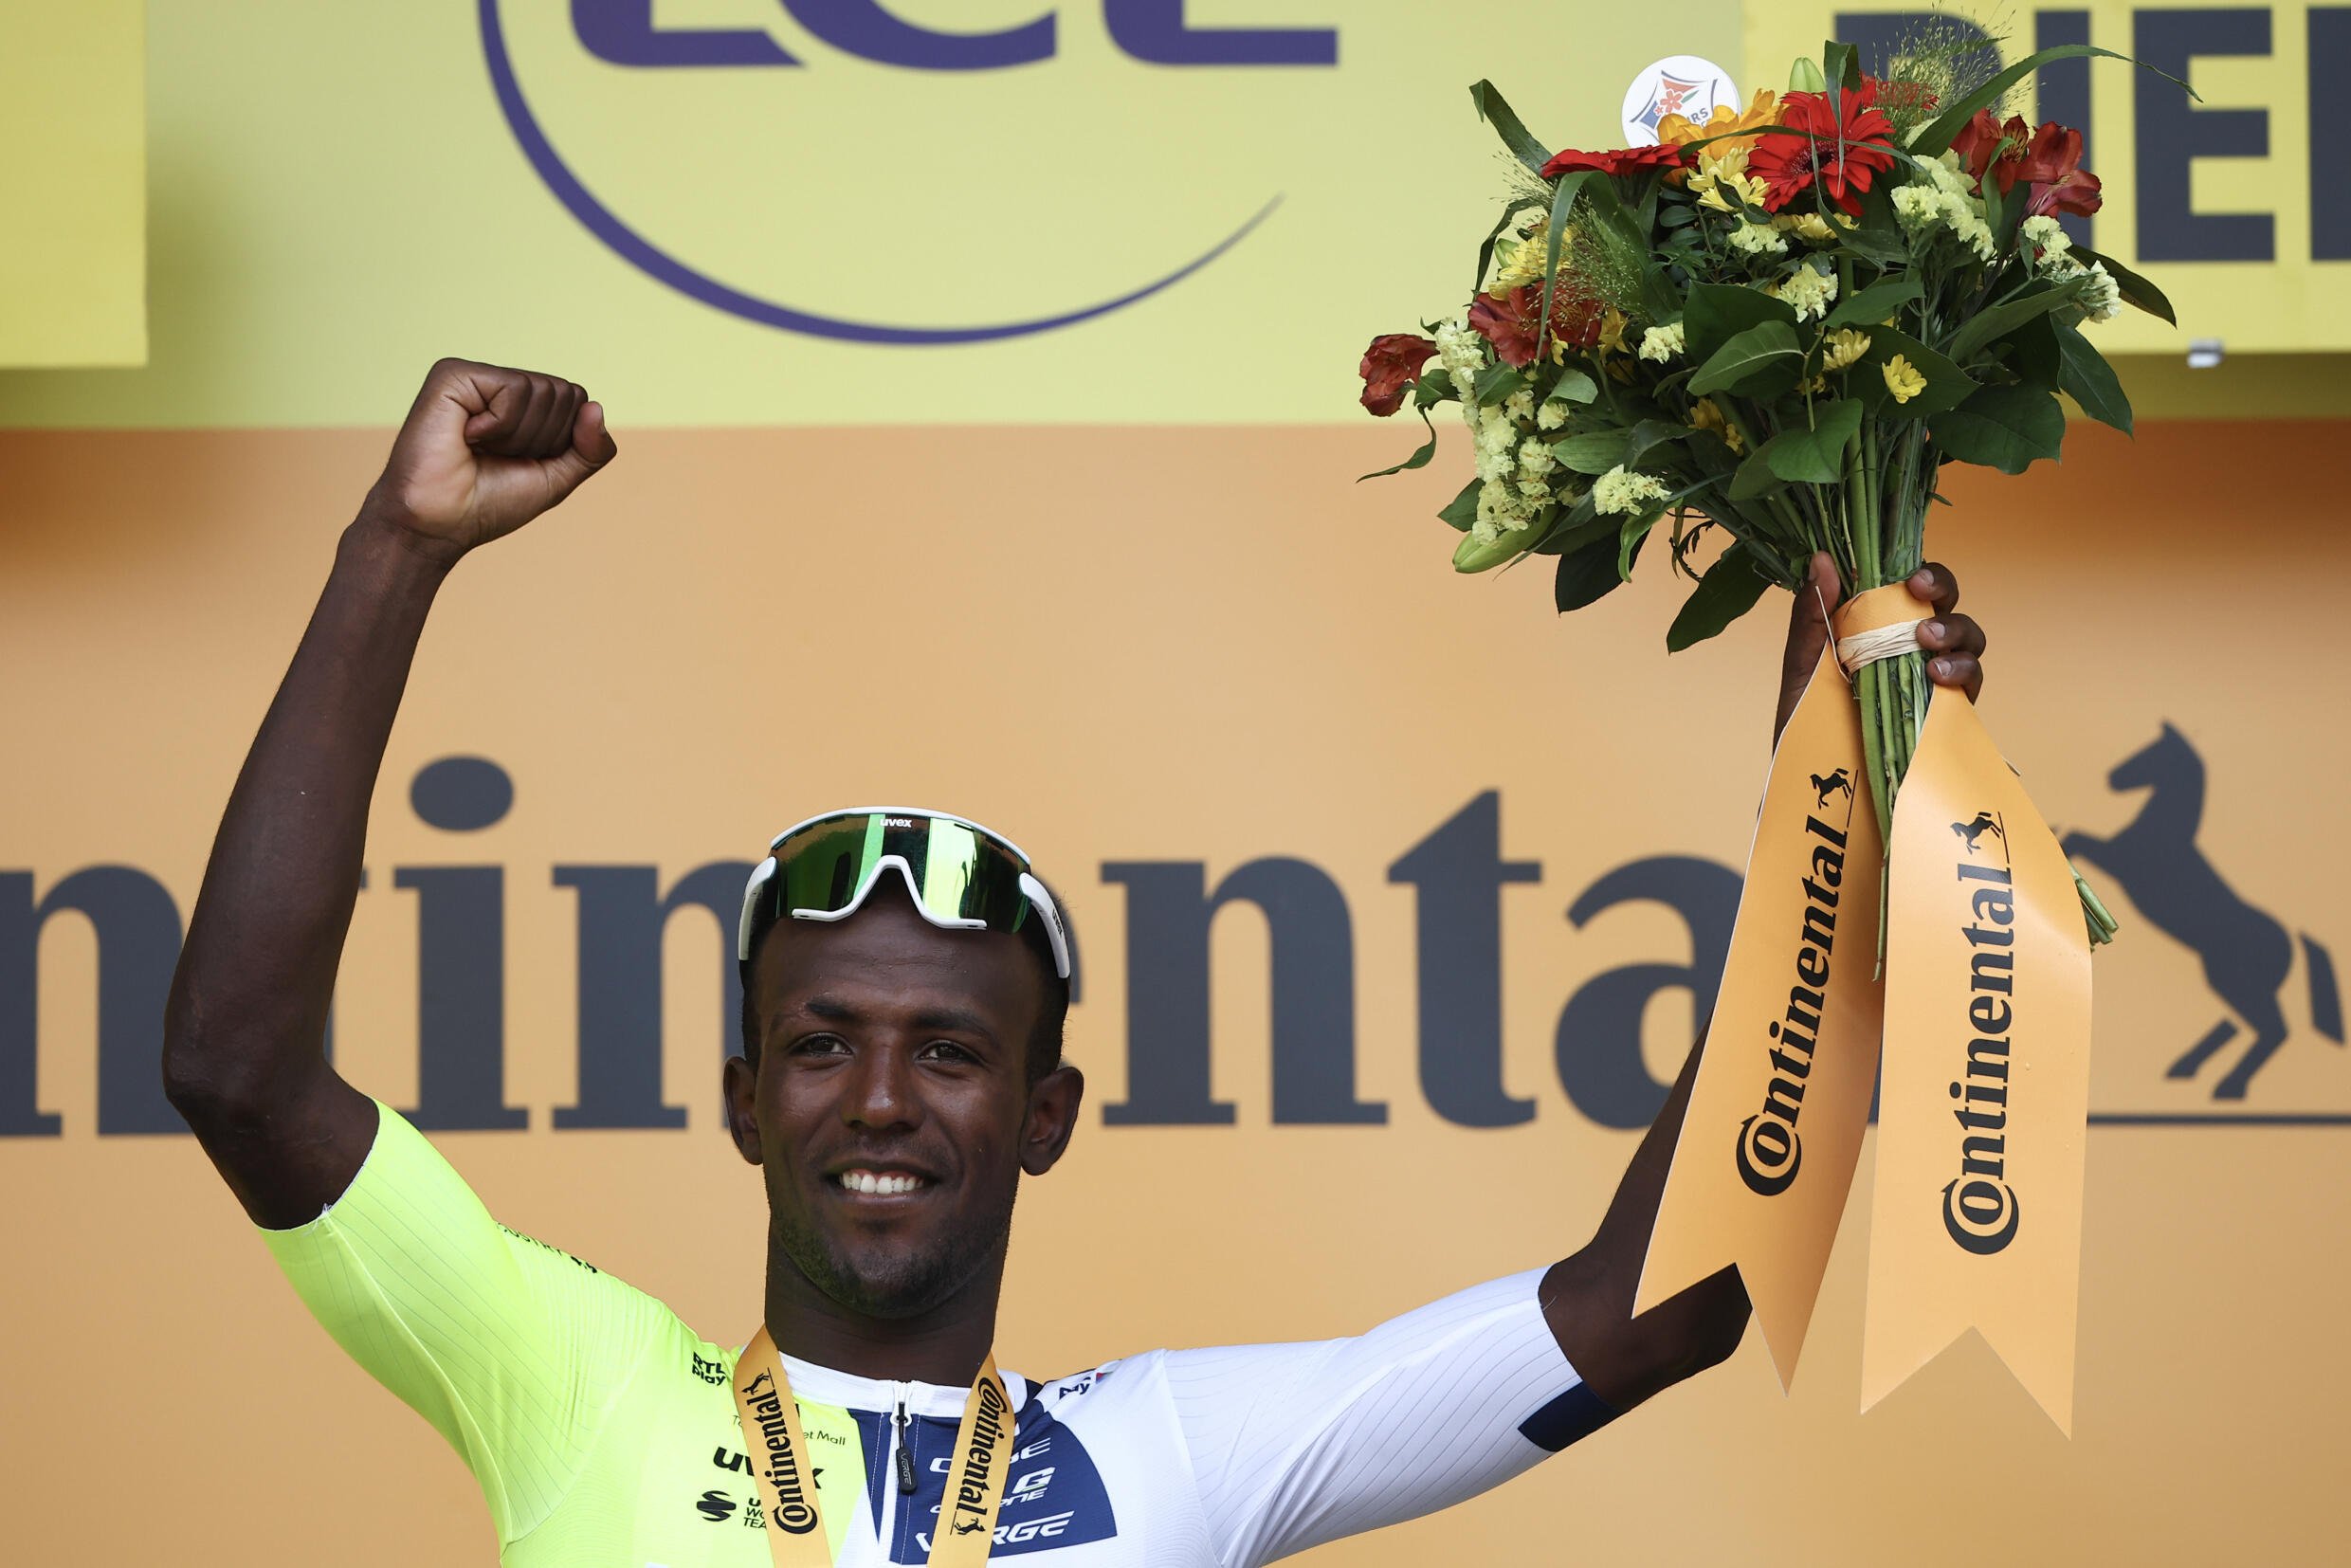 Biniam Girmay becomes the first Black African to win a stage of Tour de France